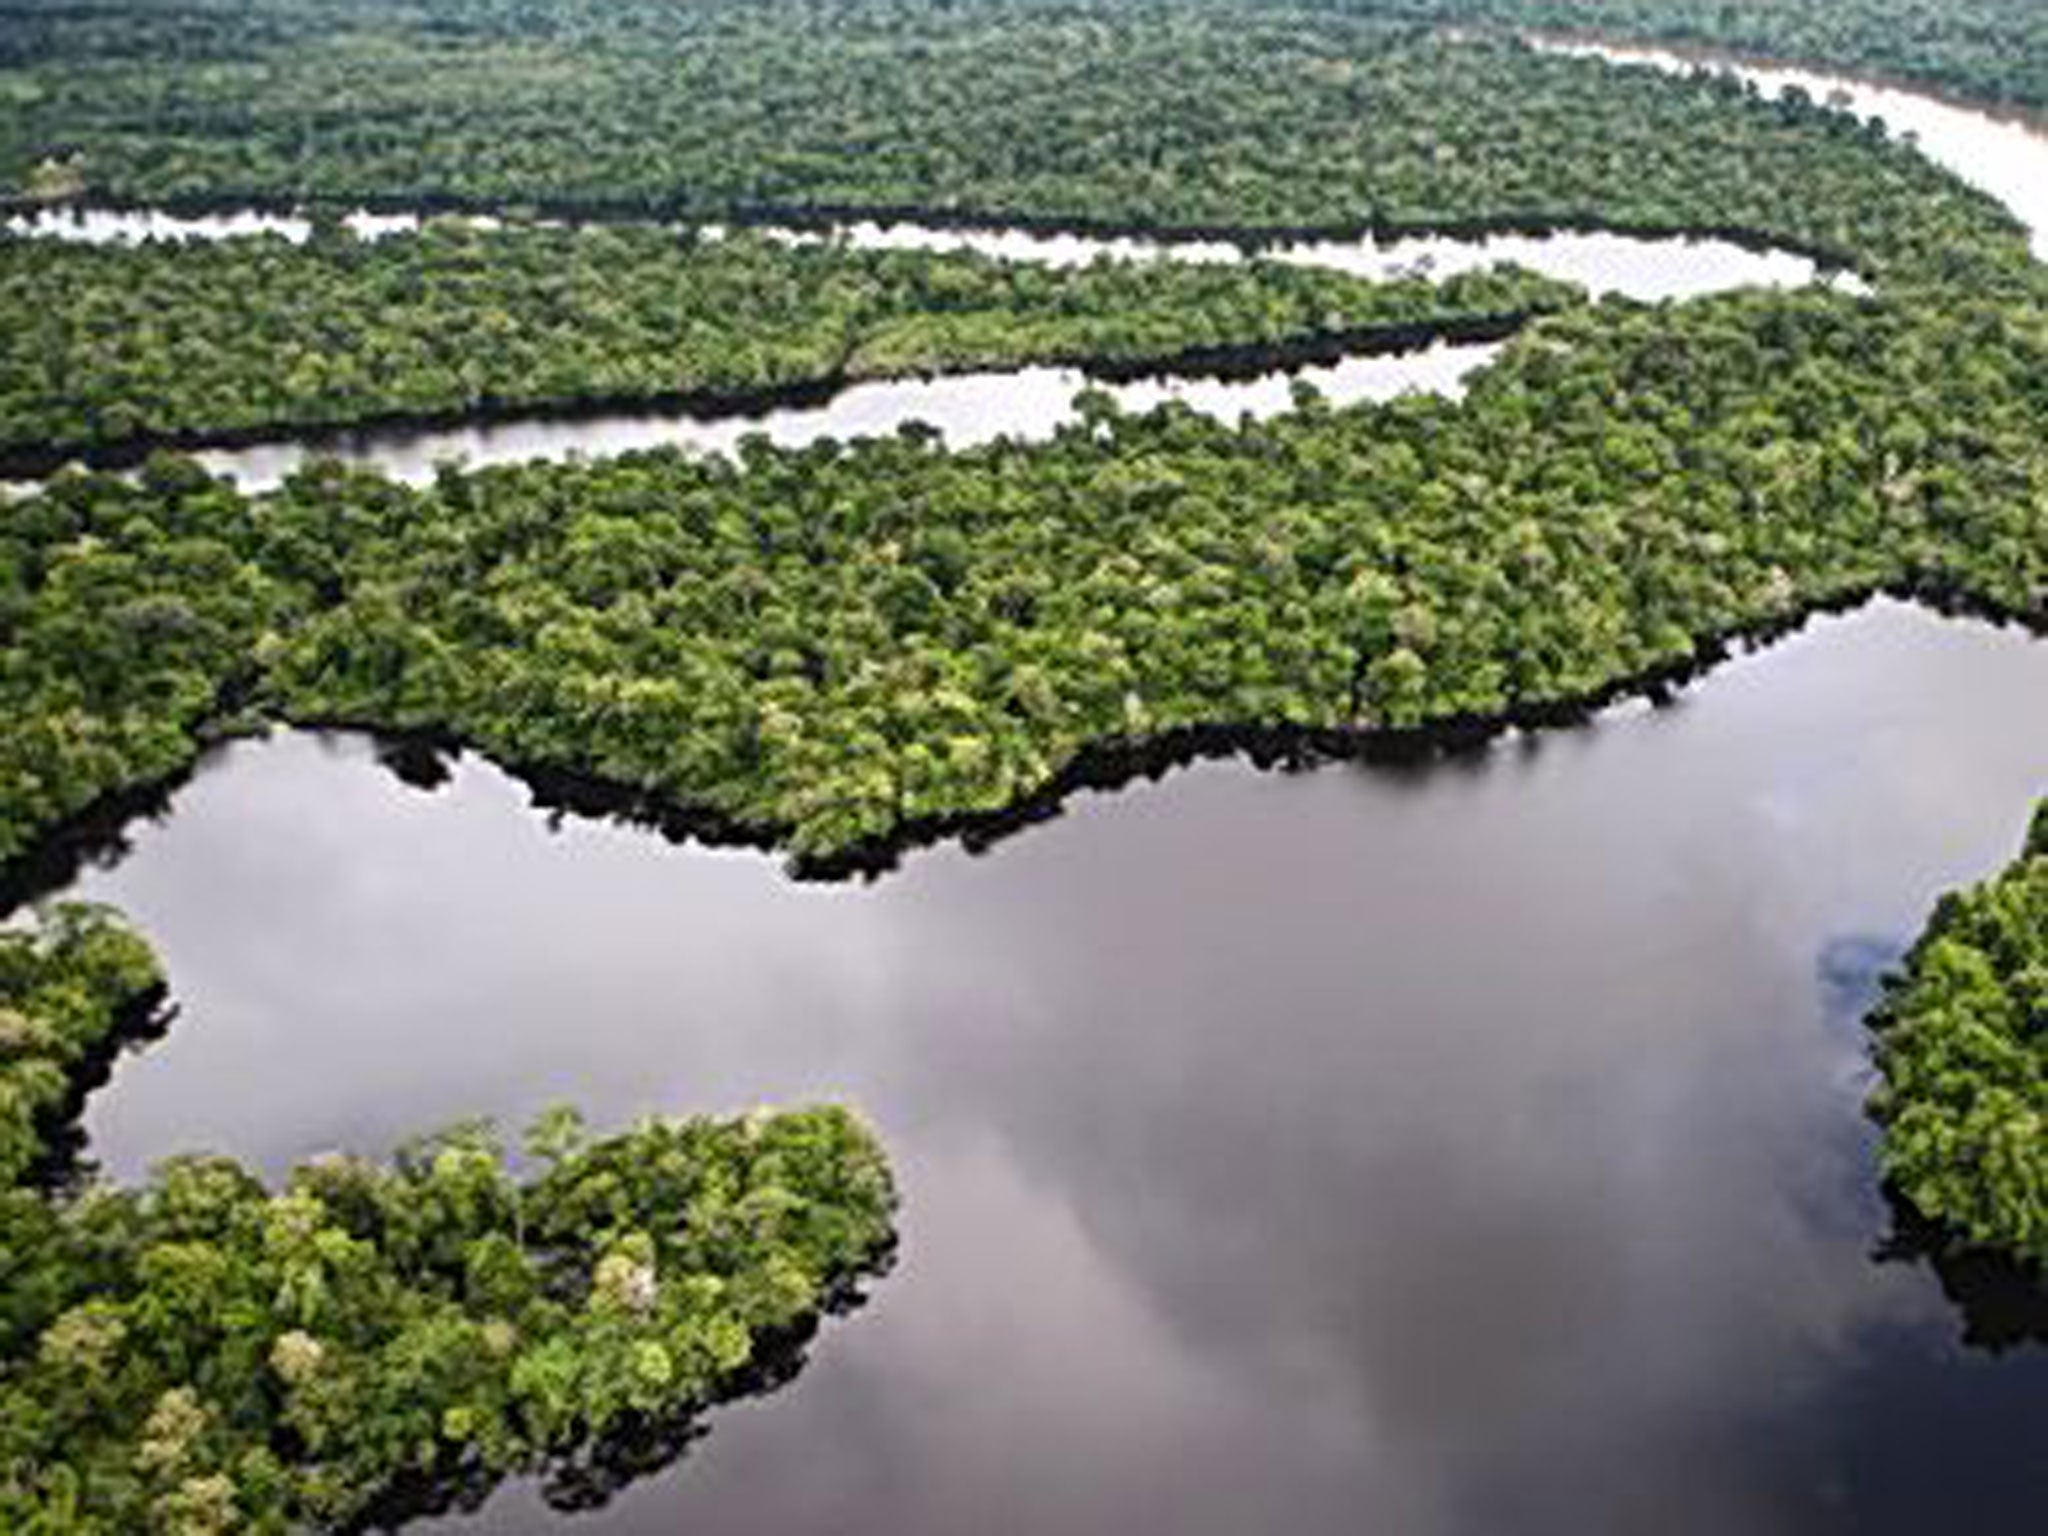 The Amazon’s eco-systems have been damaged